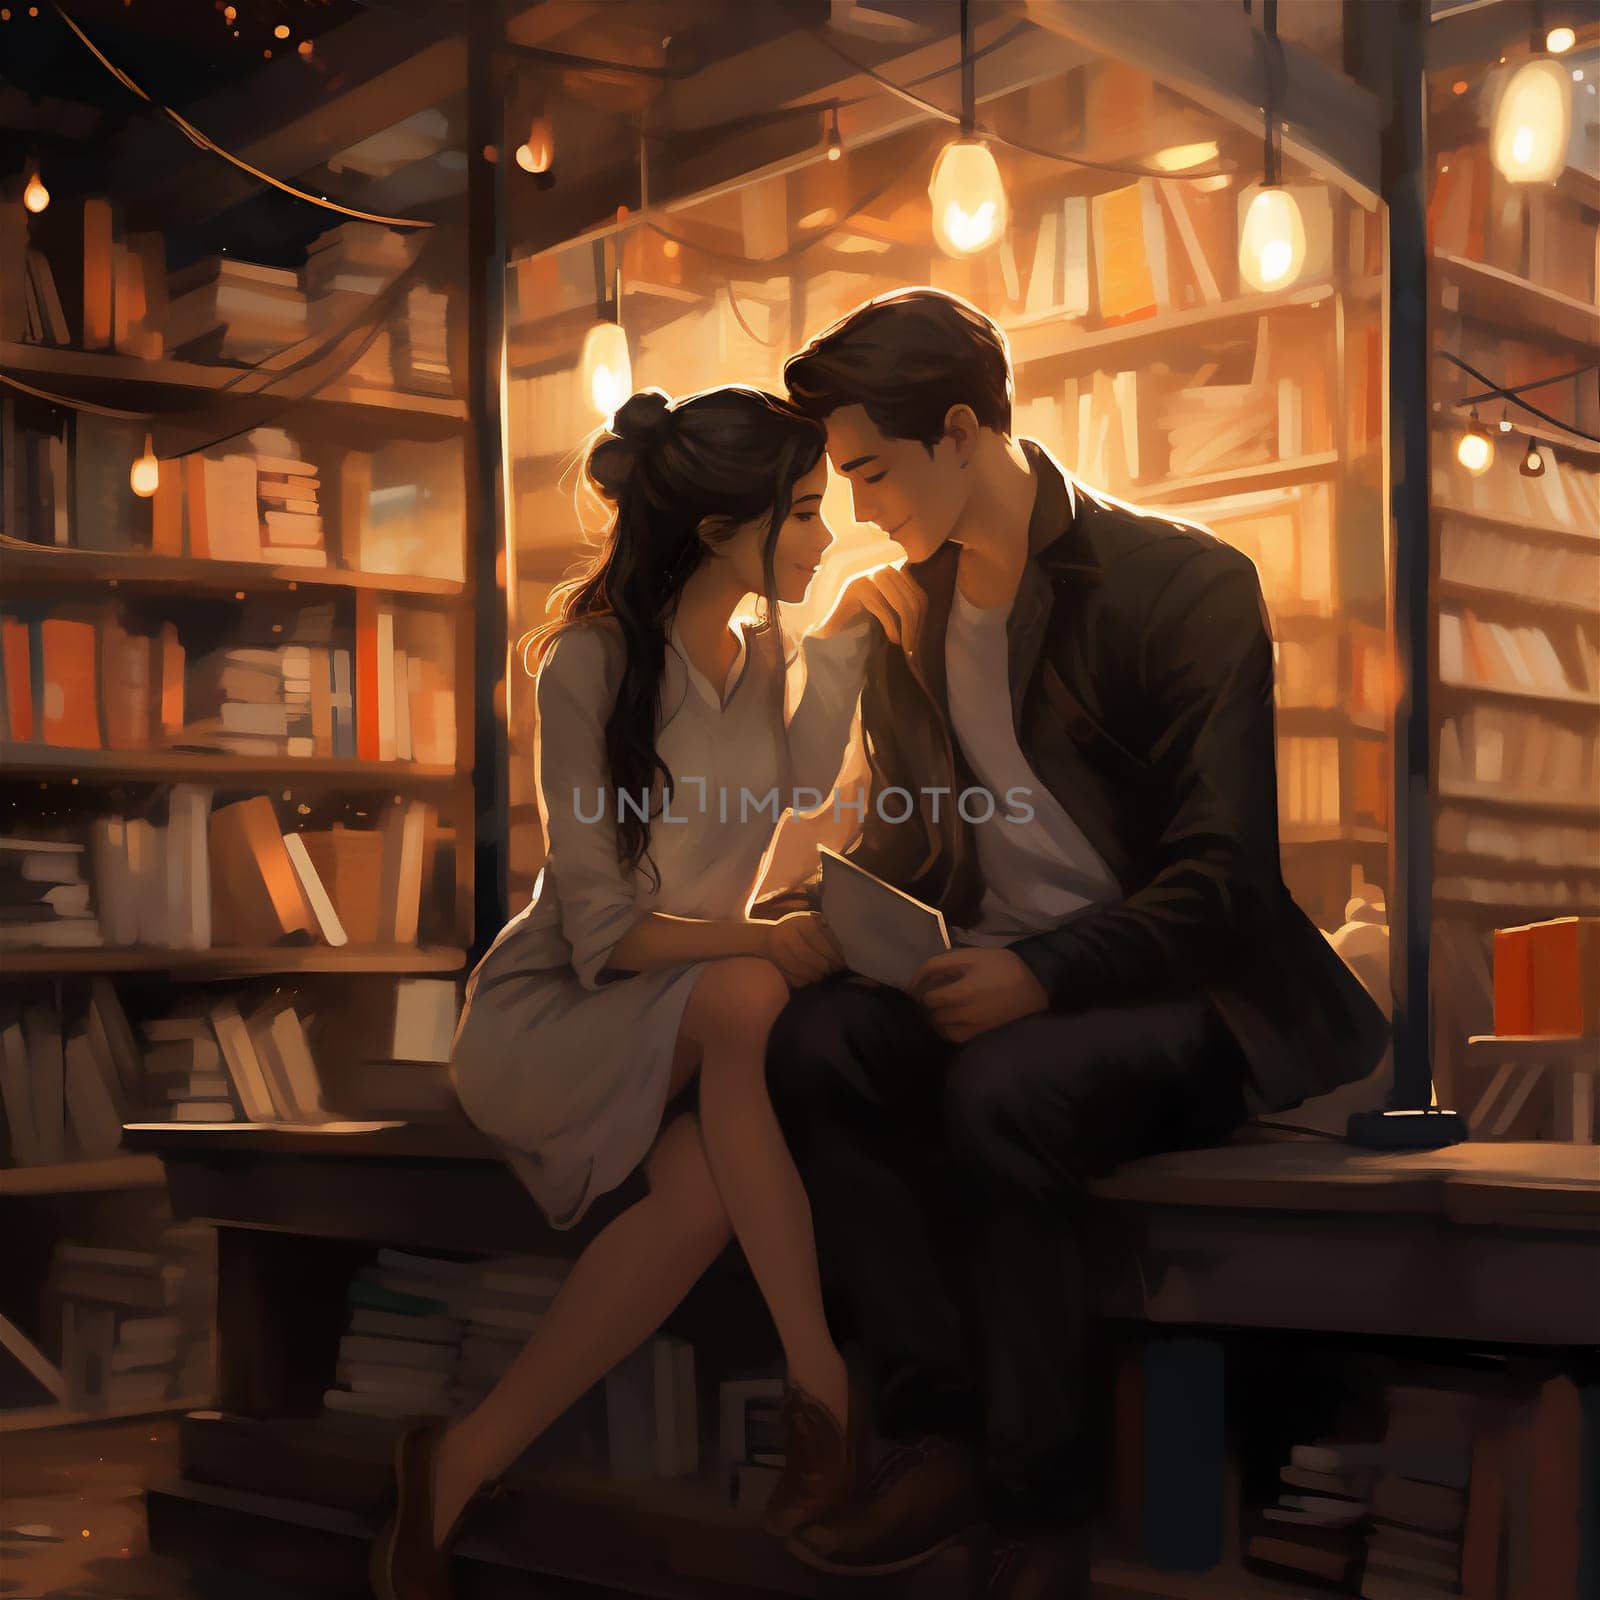 Beautiful and artistic digital painting of couple reading books in a cozy bookstore. The background is full of bookshelves and hanging lights, creating cozy atmosphere with warm and romantic mood